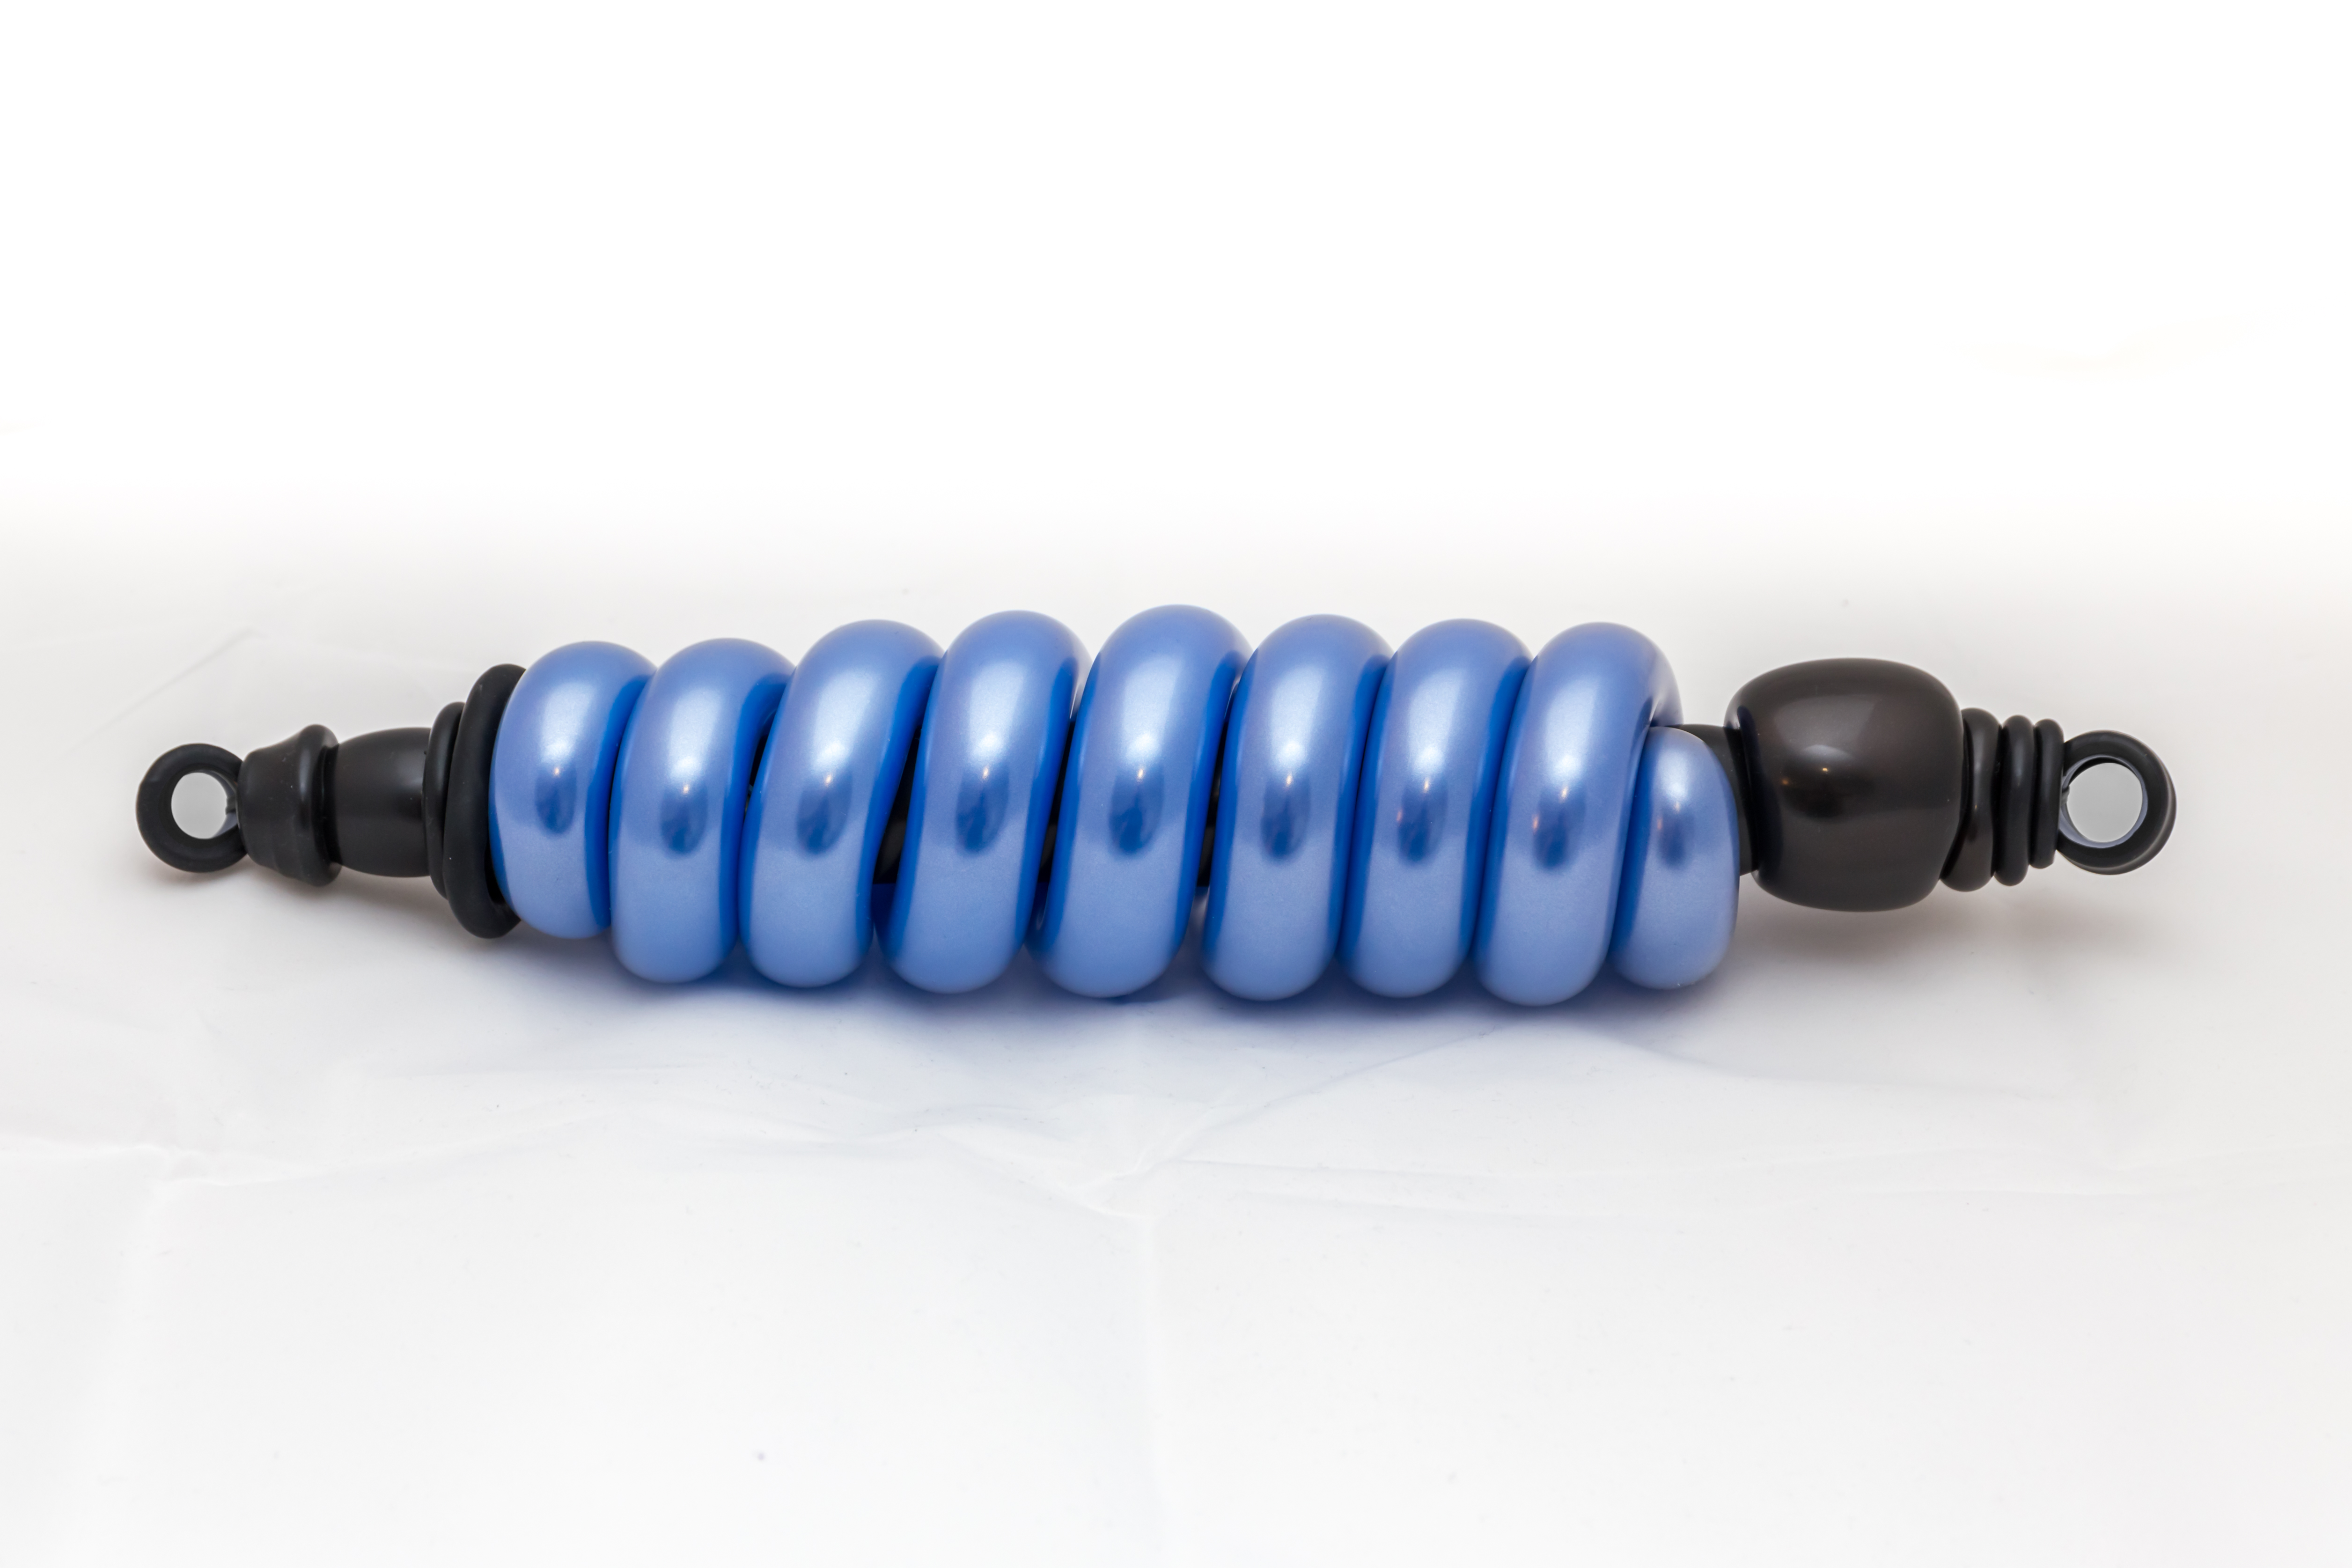 Shock absorber - made using 100% latex balloons